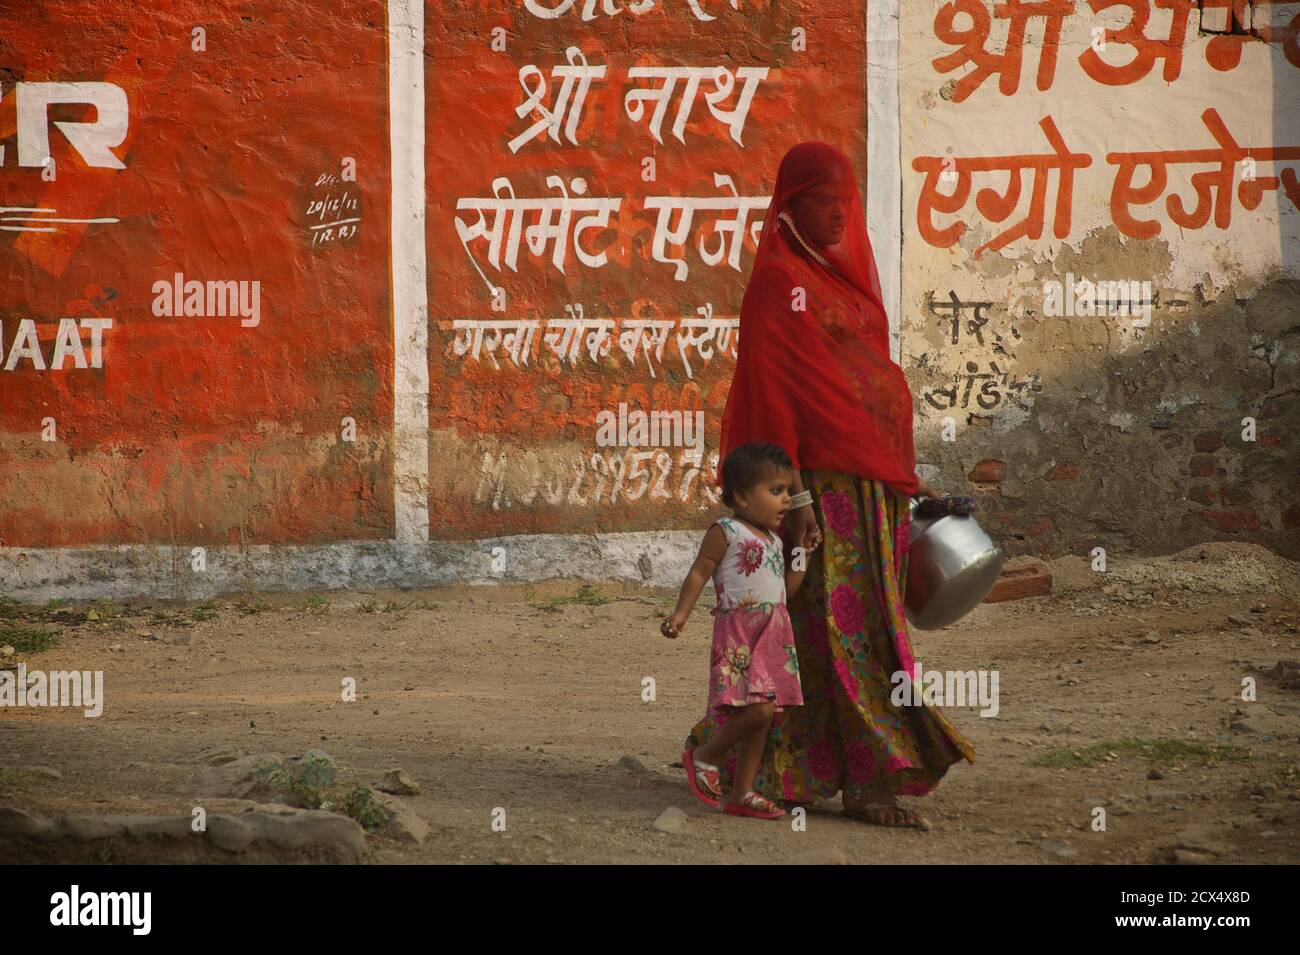 Indian woman in red veil with child. Rajasthan, India. This image contains  culturally relevant material: A sari is a South Asian female garment that  consists of a drape varying from 4 to